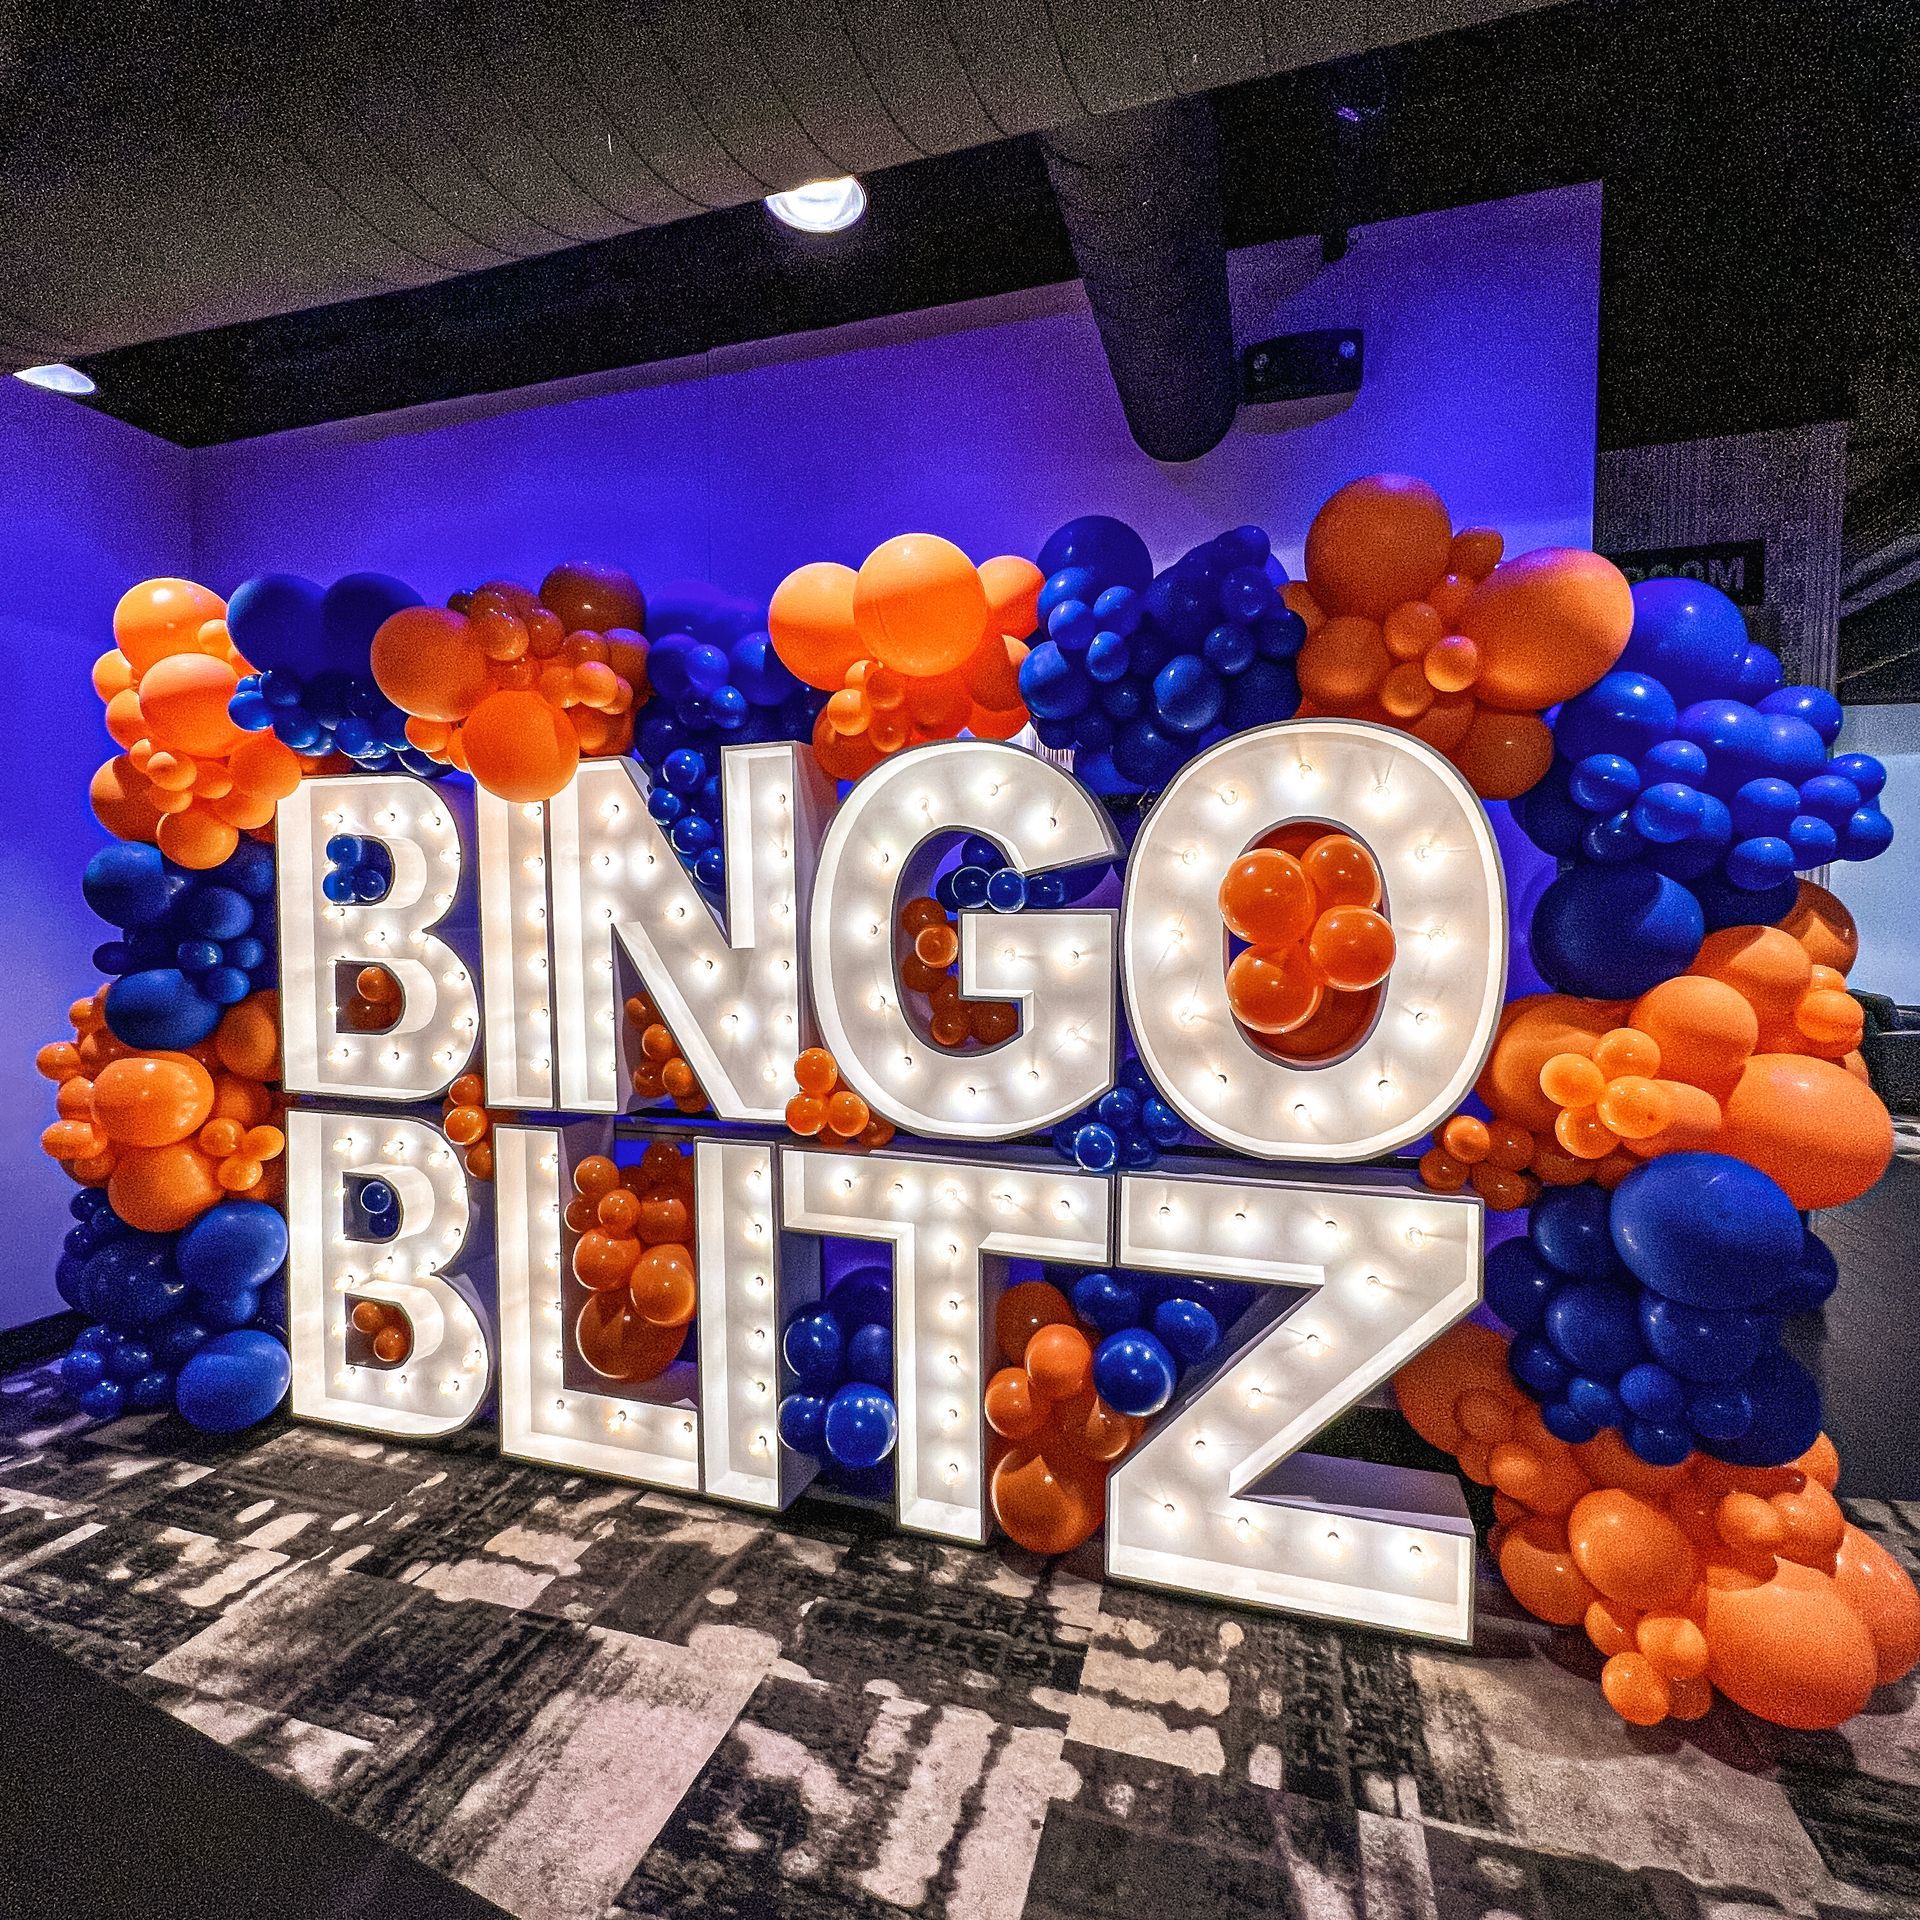 A large sign that says bingo blitz is surrounded by balloons.